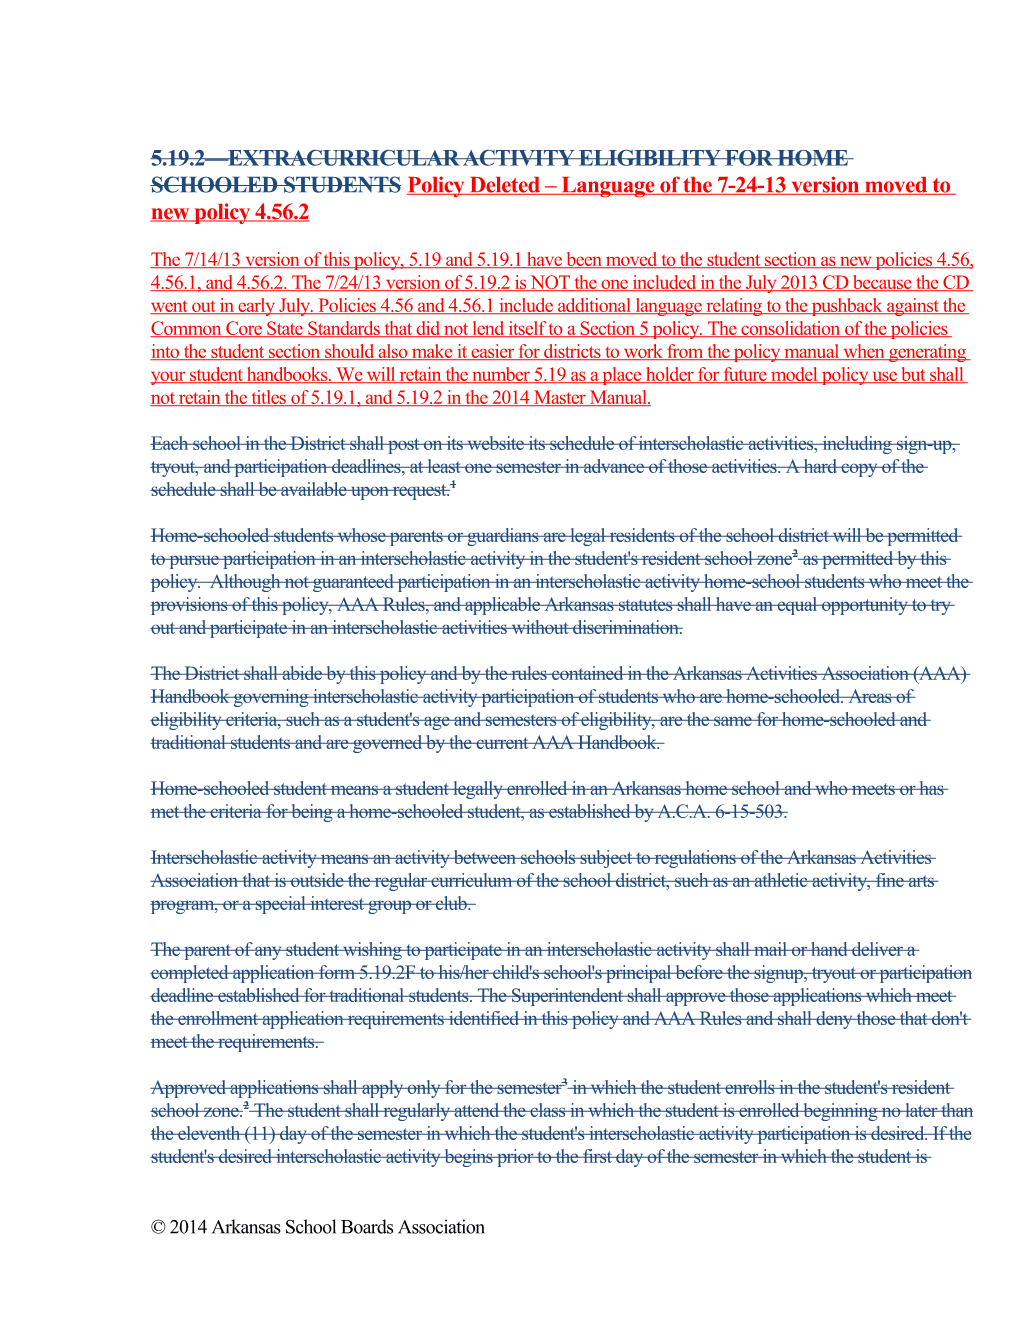 5.19.2 EXTRACURRICULAR ACTIVITY ELIGIBILITY for HOME SCHOOLED STUDENTS Policy Deleted